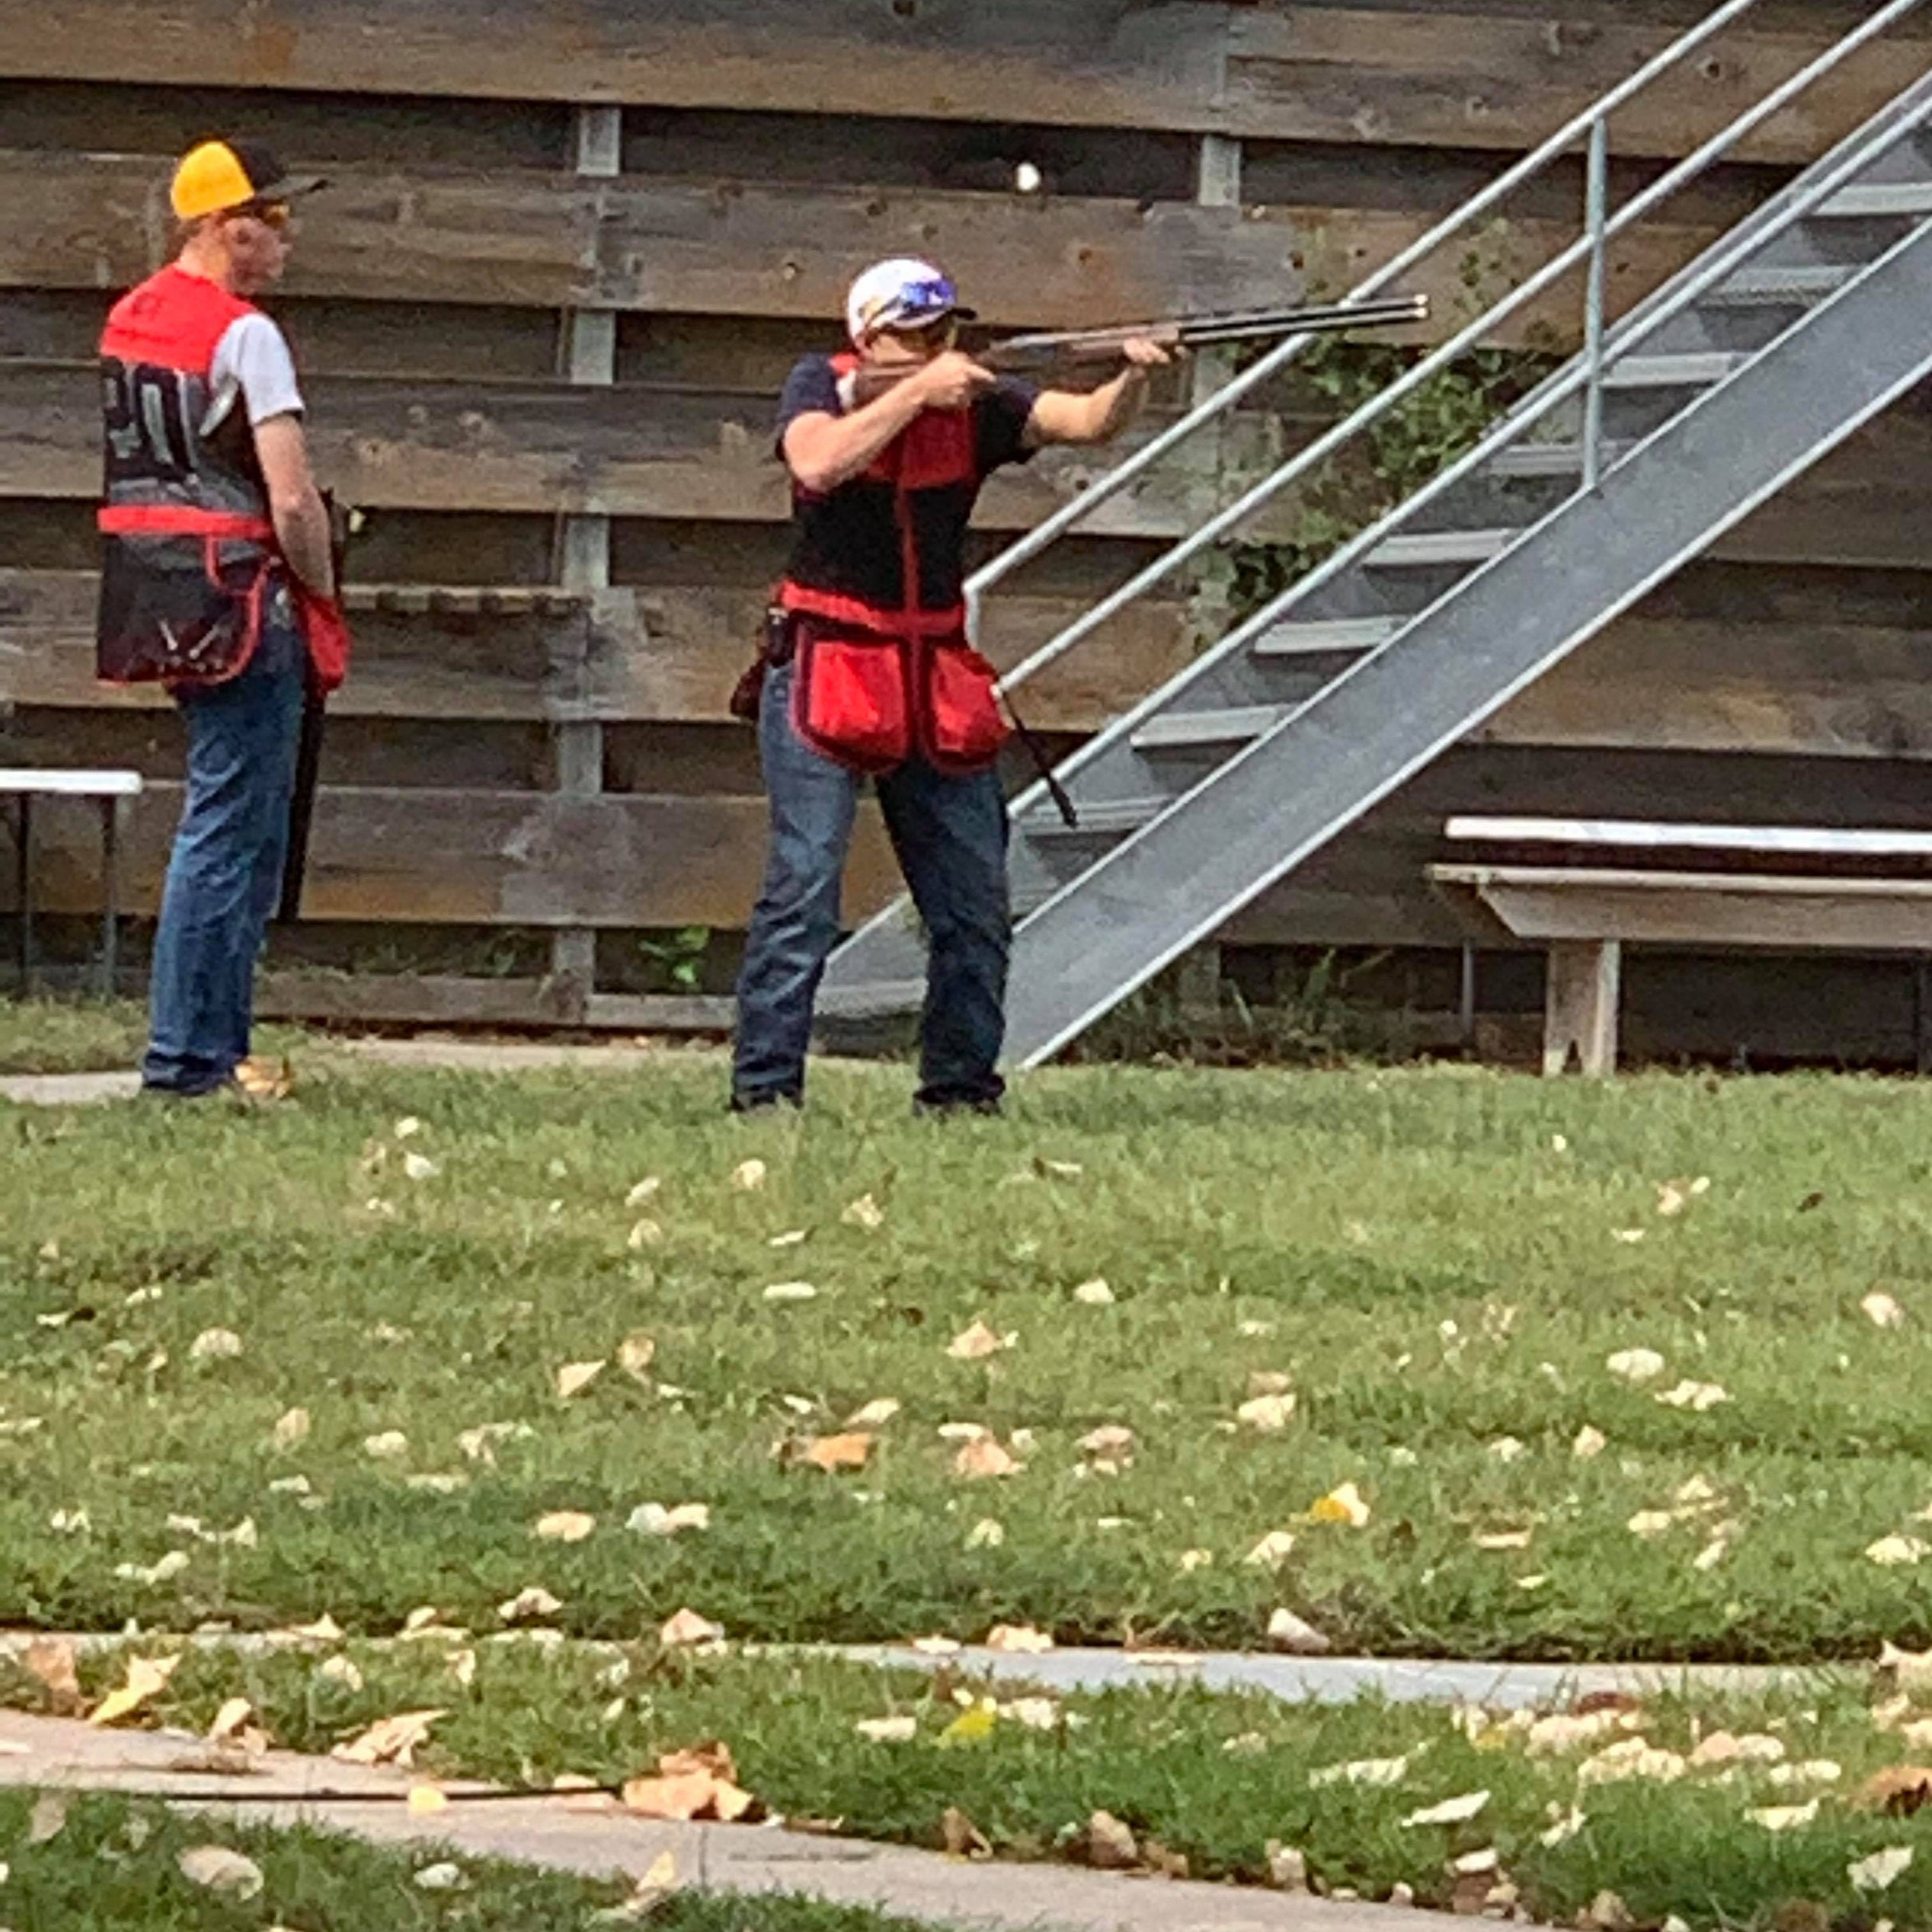 Trey Barnhart, McCook, watches NCTA Aggie teammate Kaden Bryant, Firth, take aim in Lincoln on Sunday. (Photo provided by Kaden Bryant)